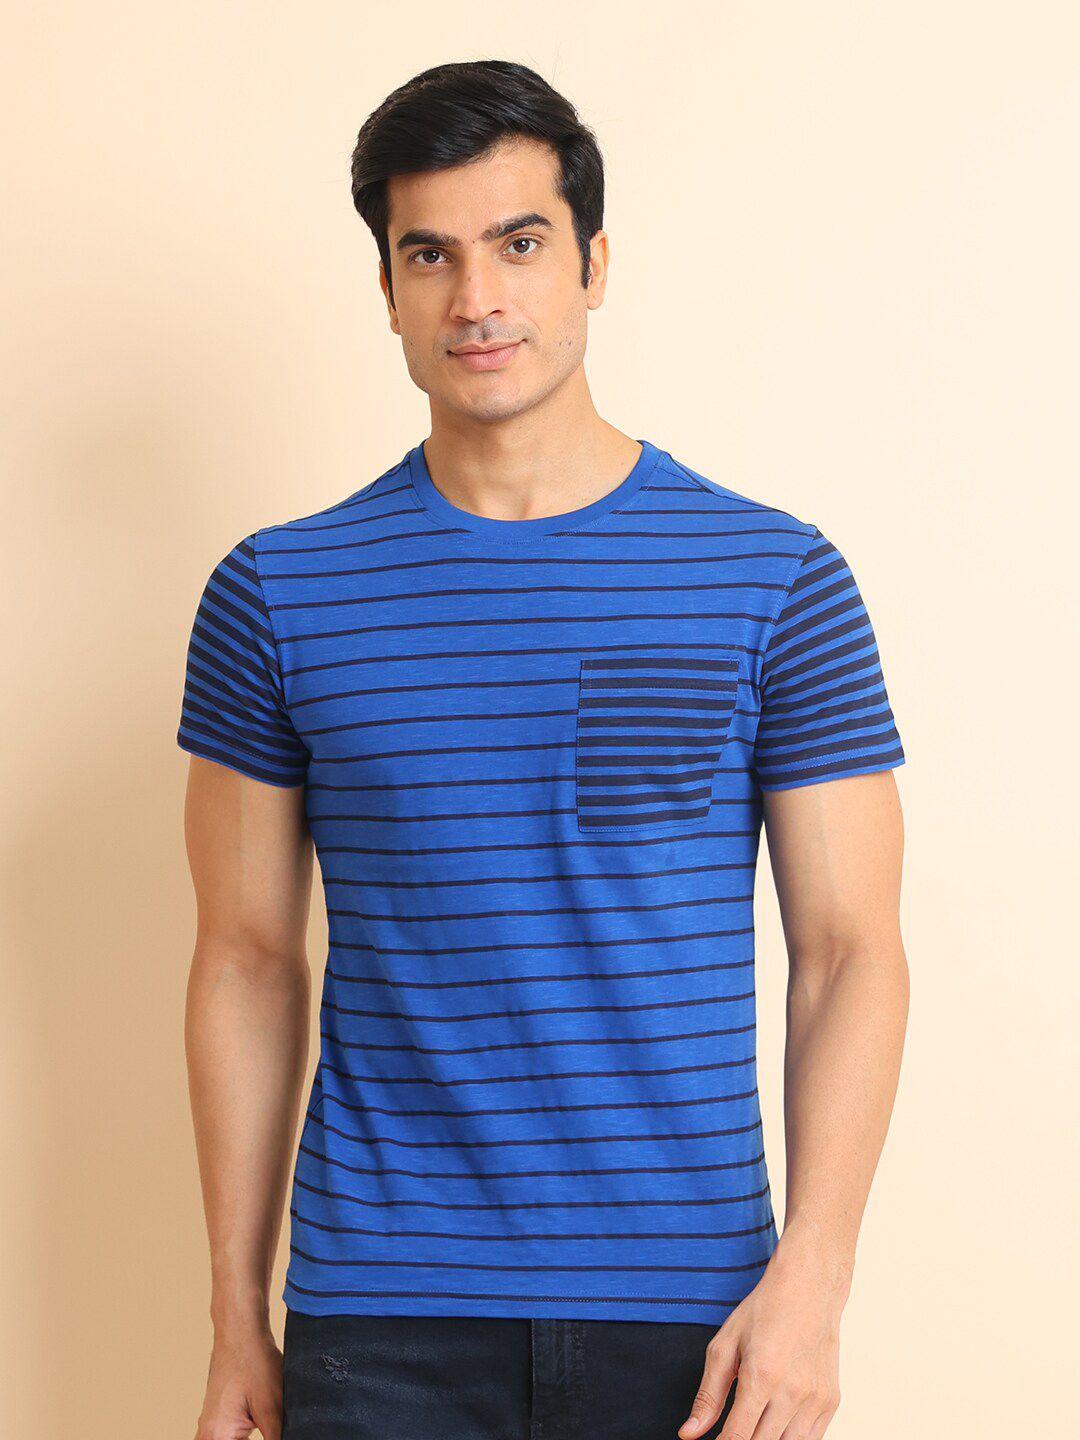 berry-blues-striped-round-neck-short-sleeves-cotton-t-shirt